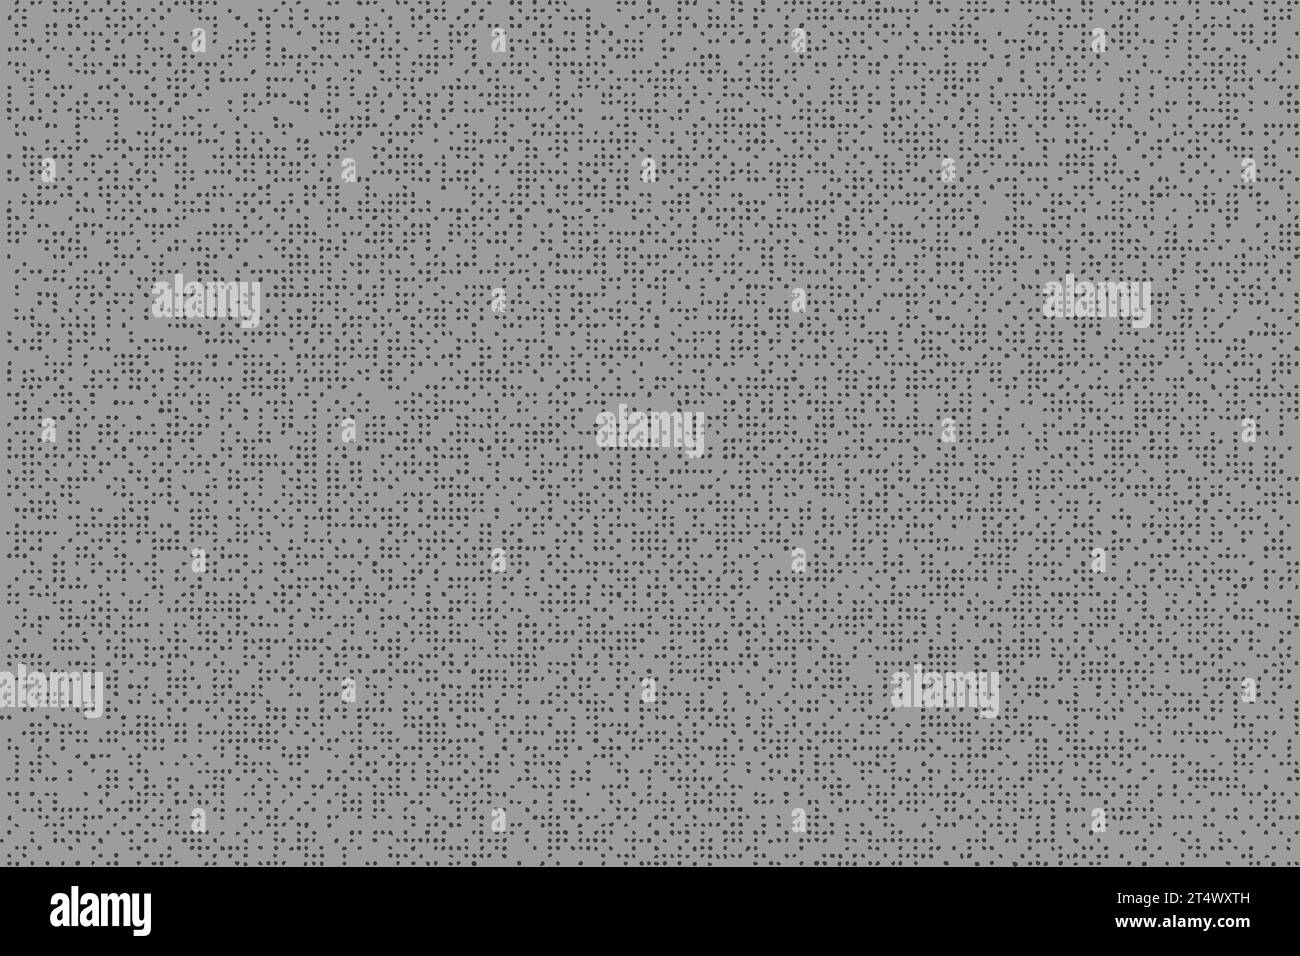 Monochrome gritty grunge texture. Background with grain noise effect. Retro template with abstract dotted grain dots. Vector illustration. Stock Vector